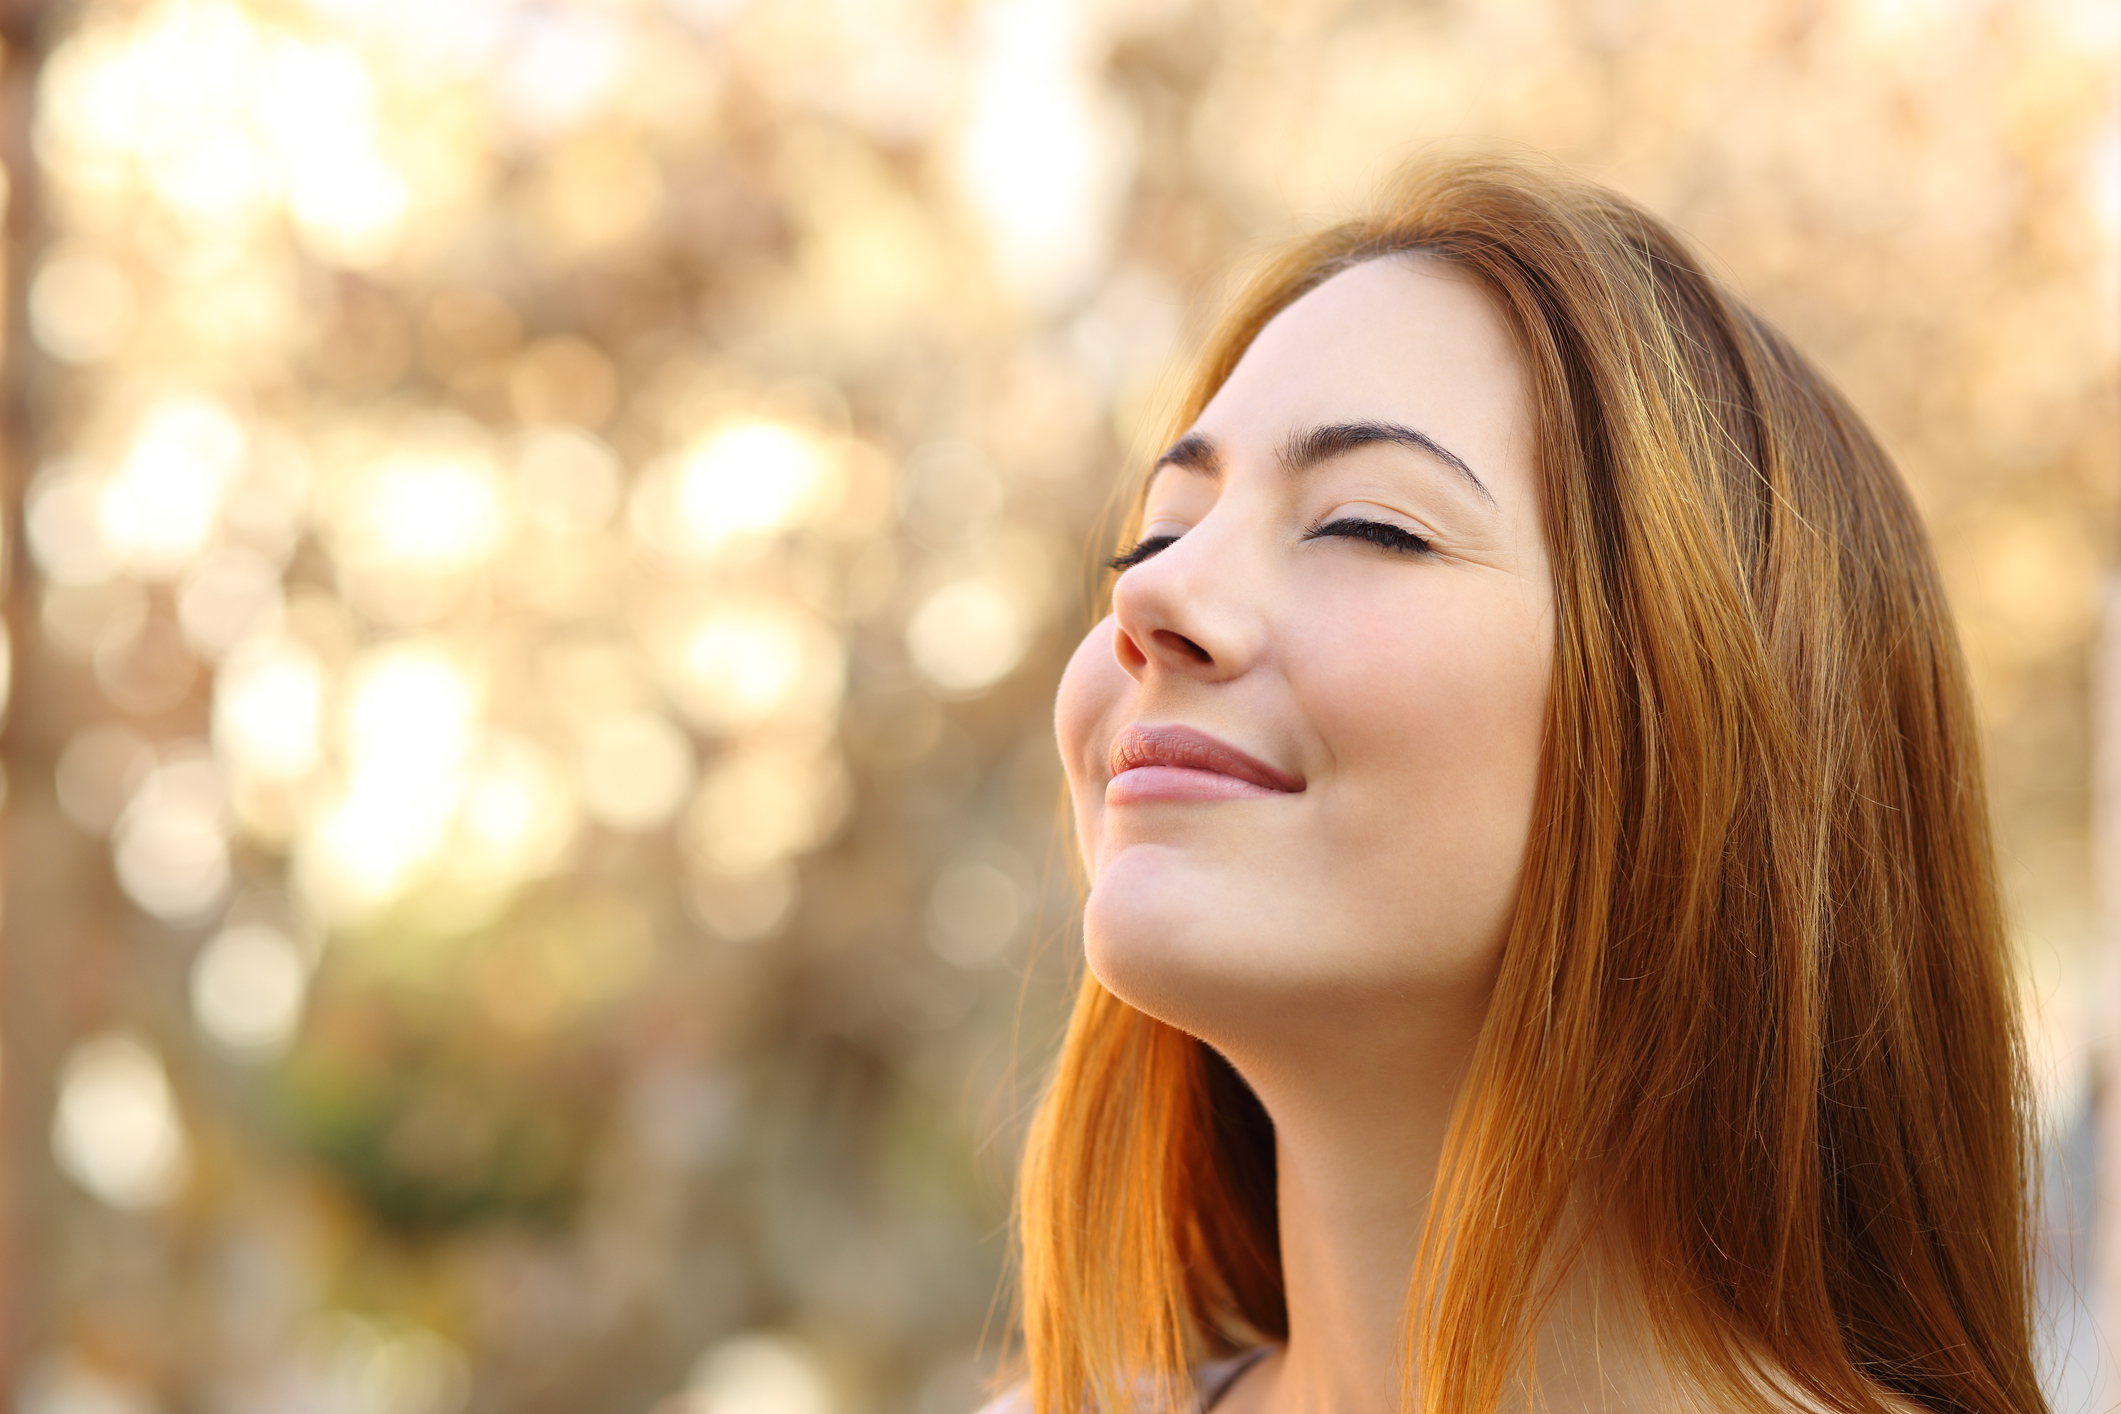 Beautiful woman doing breath exercises with an autumn background